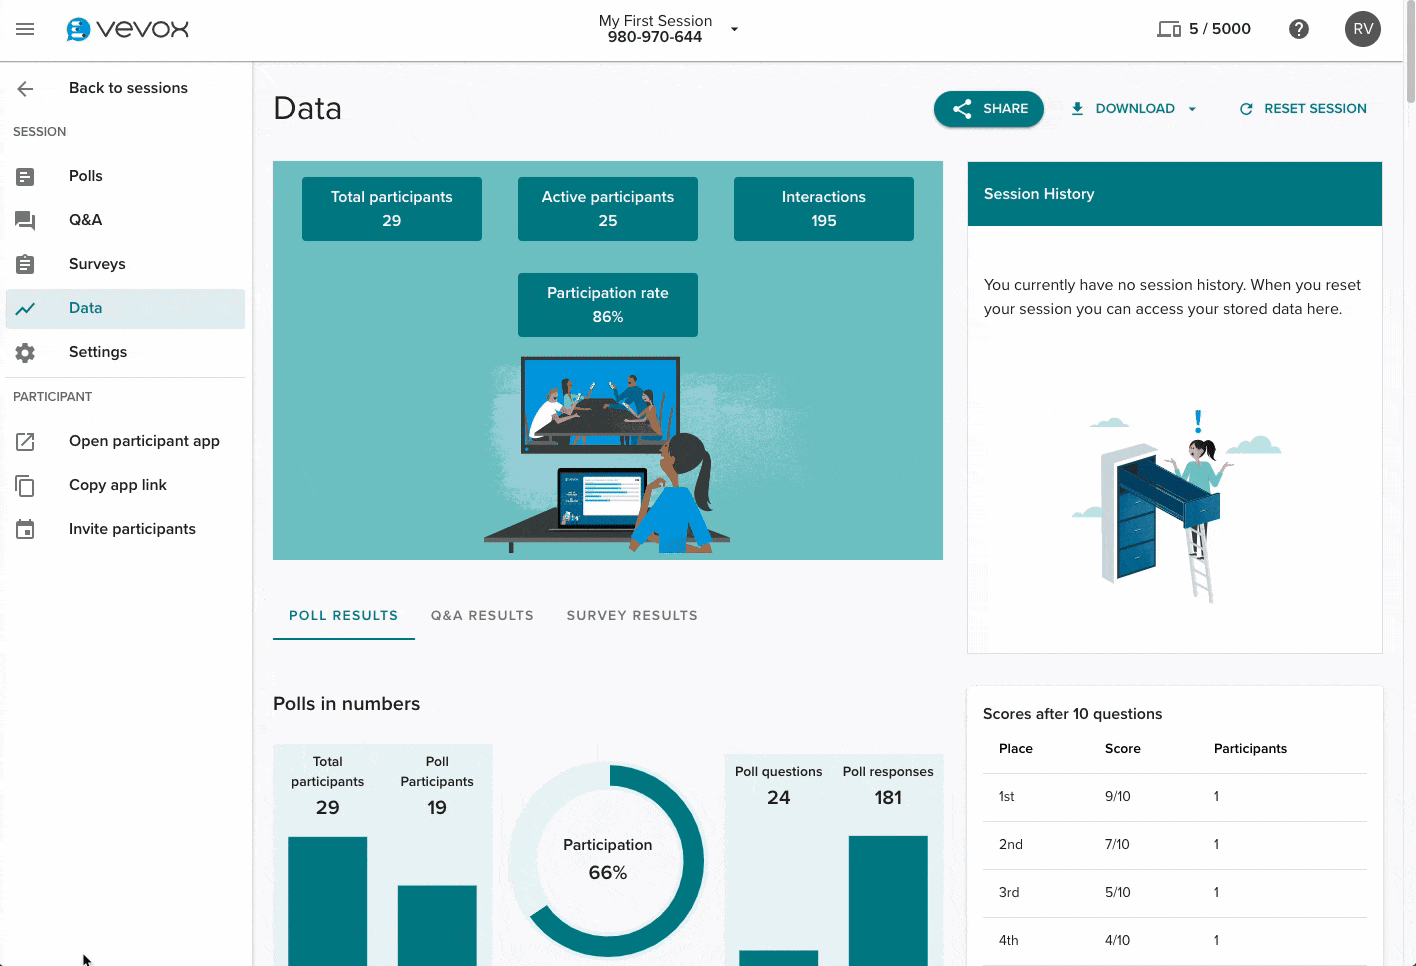 View data images in dashboard.gif